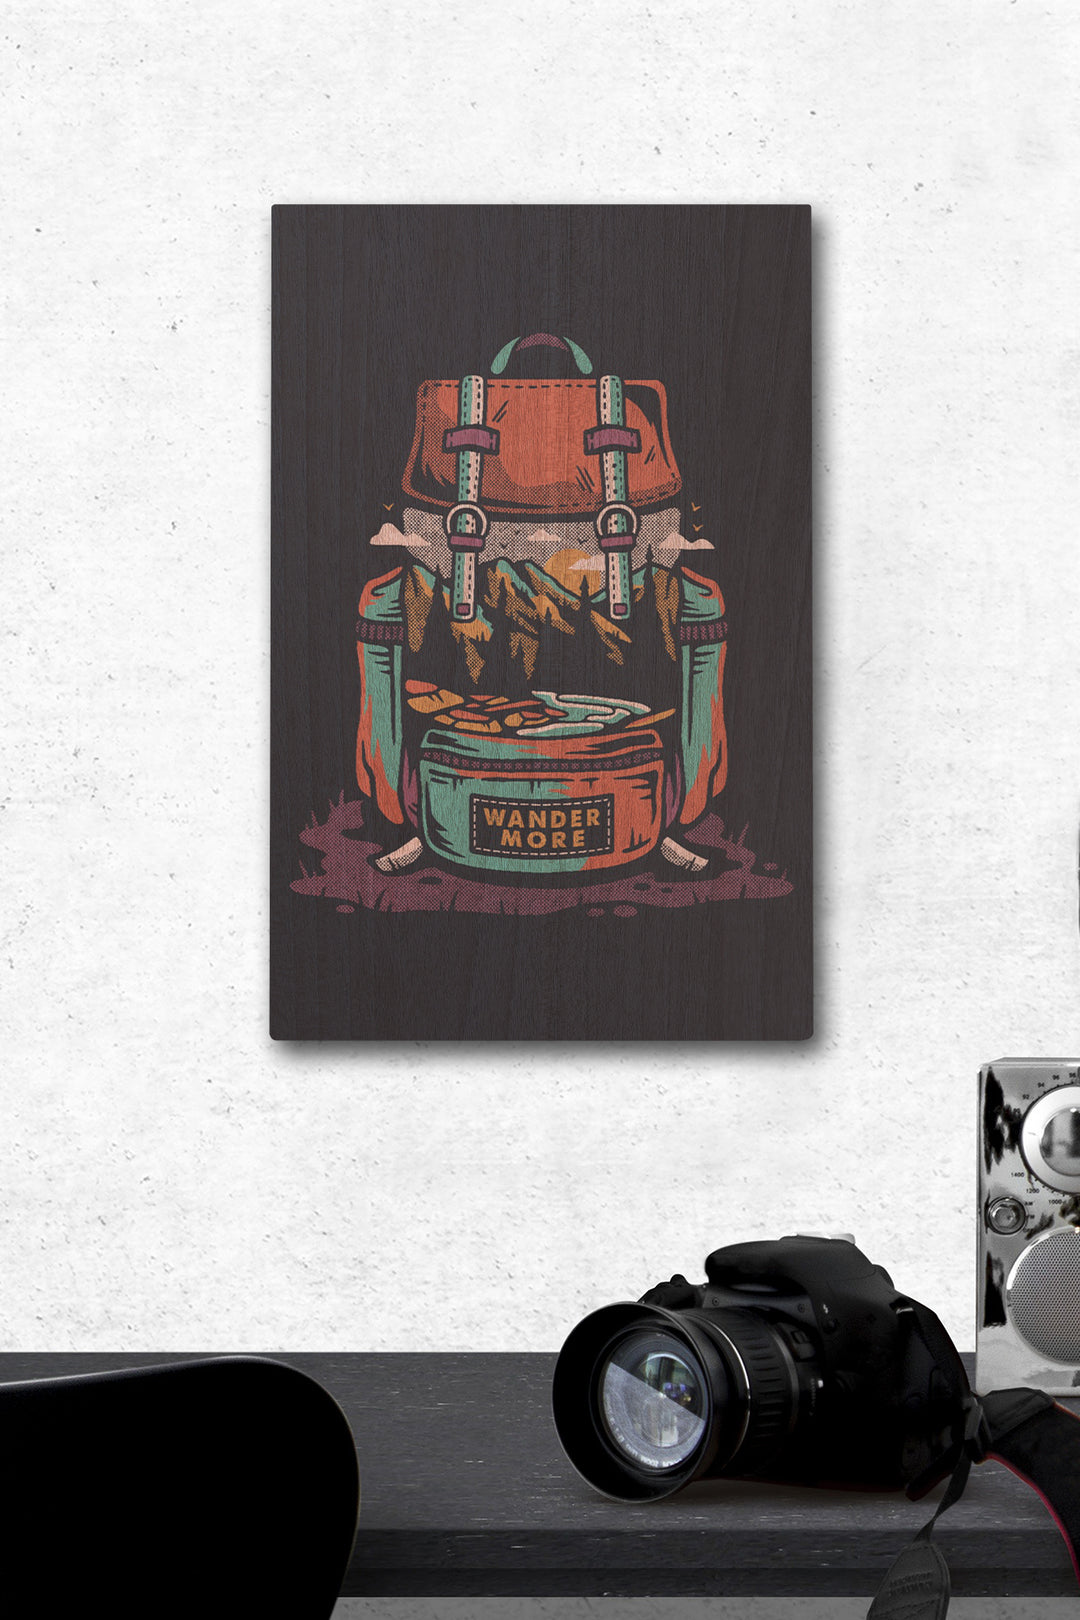 Backpack, Wander More, Distressed Vector, Lantern Press Artwork, Wood Signs and Postcards